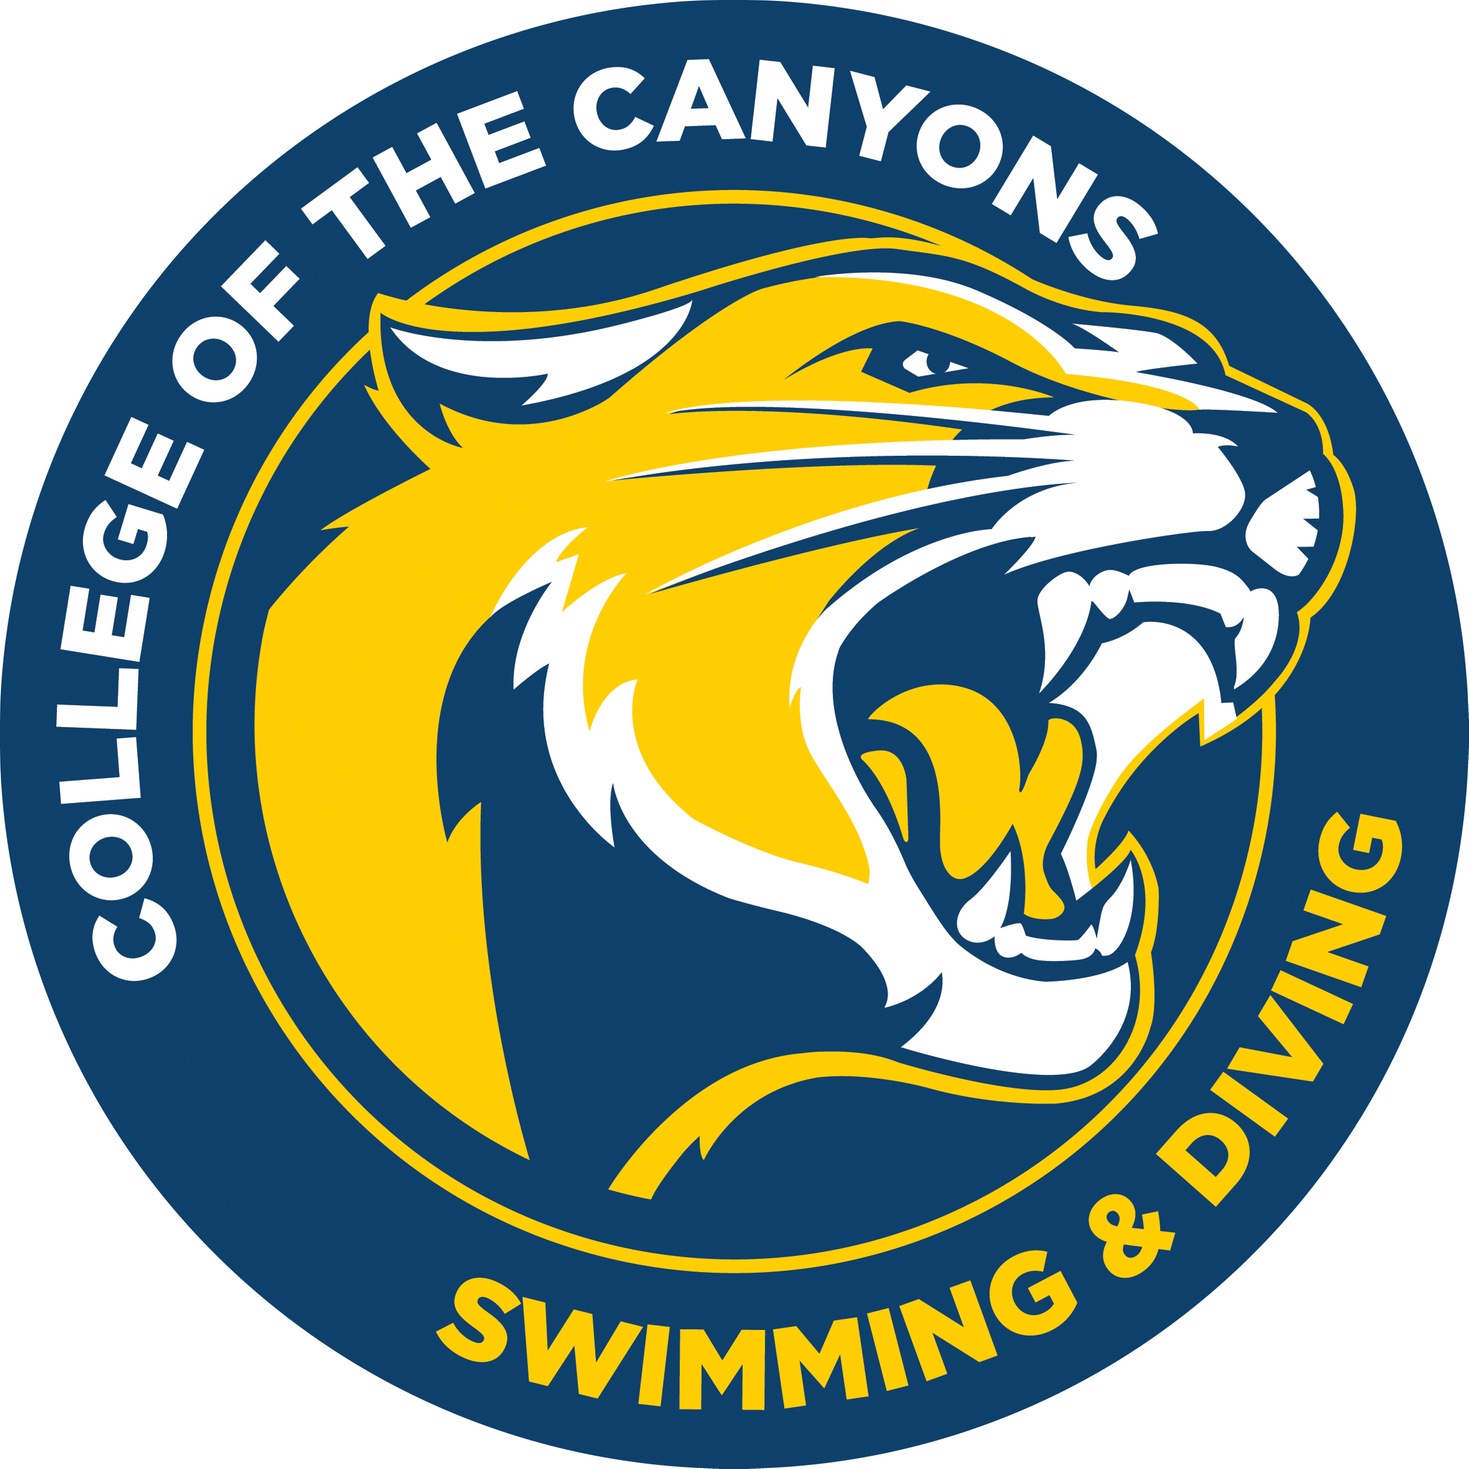 College of the Canyons swimming & diving logo.